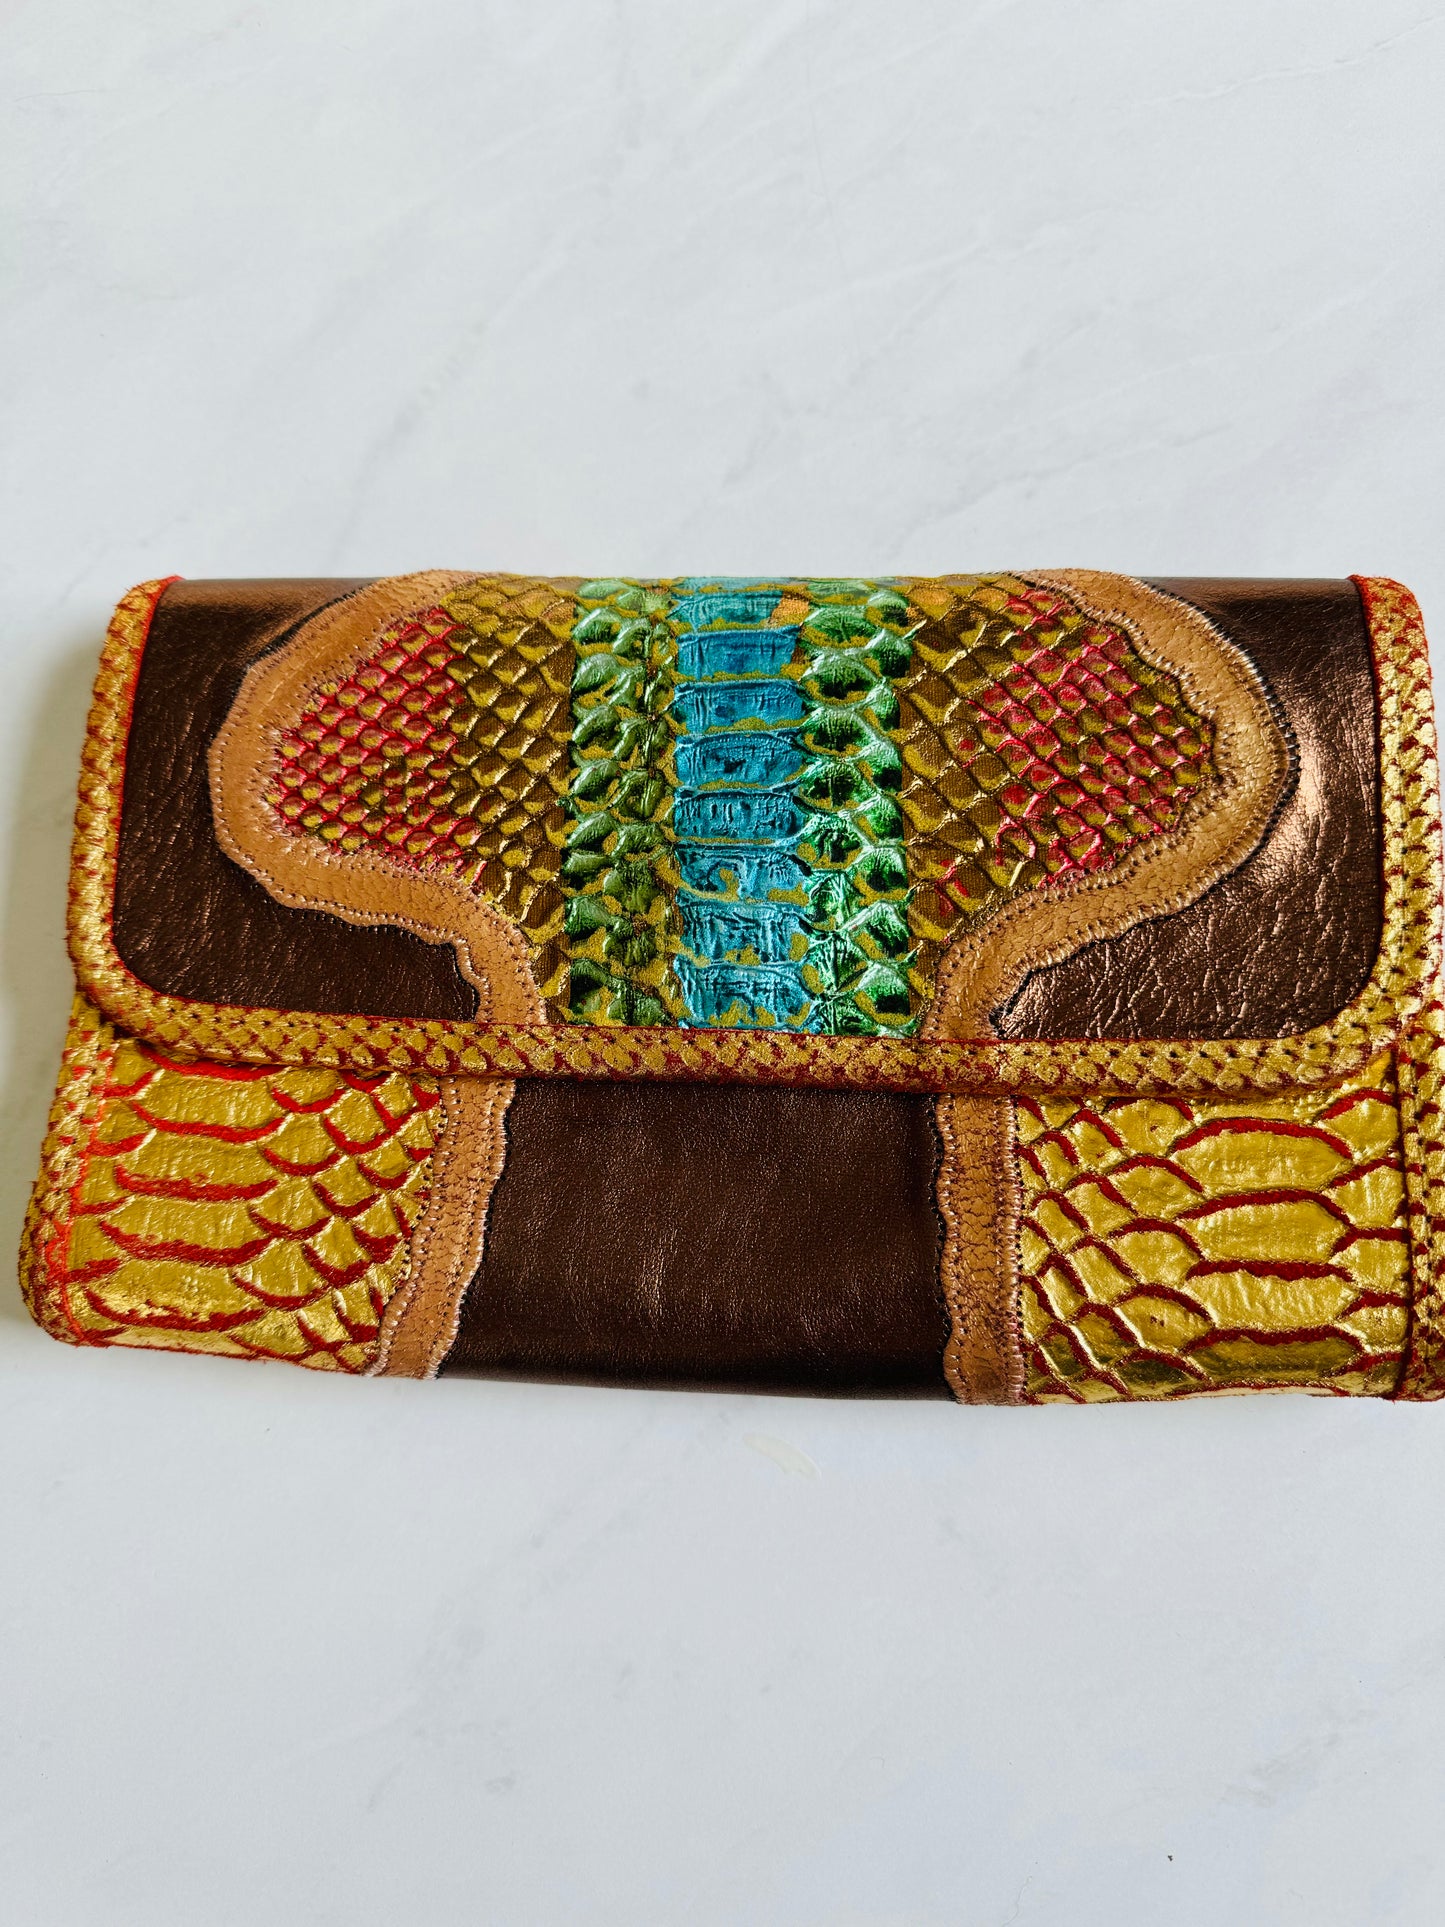 Gorgeous vintage Carlos Falchi clutch with iridescent snake print and bronze colorway